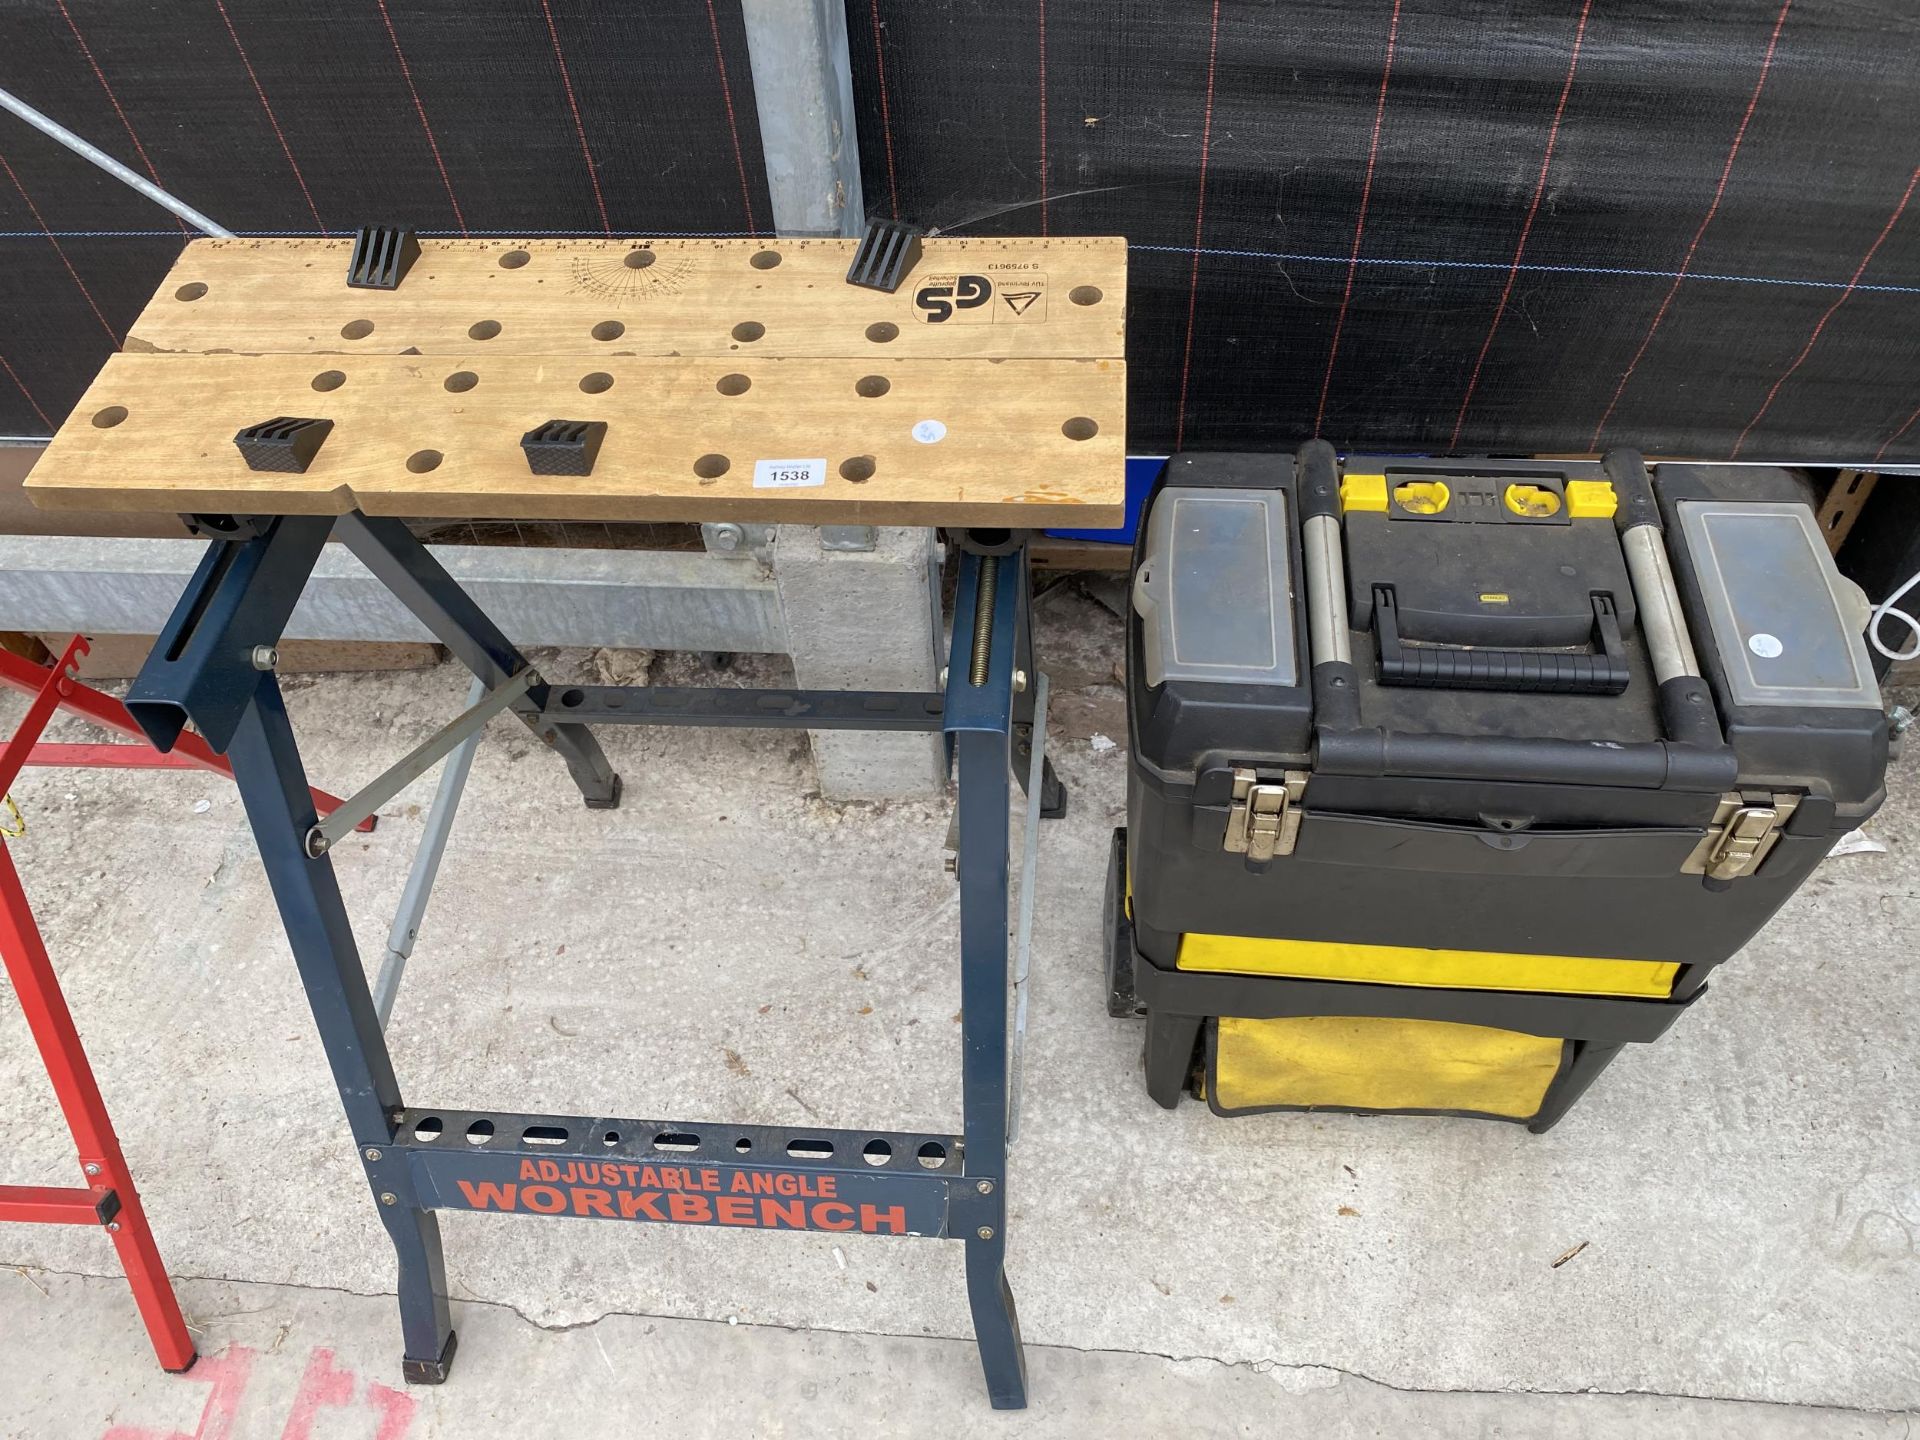 AN ADJUSTABLE WORK BENCH AND A TOOL BOX CONTAINING TOOLS